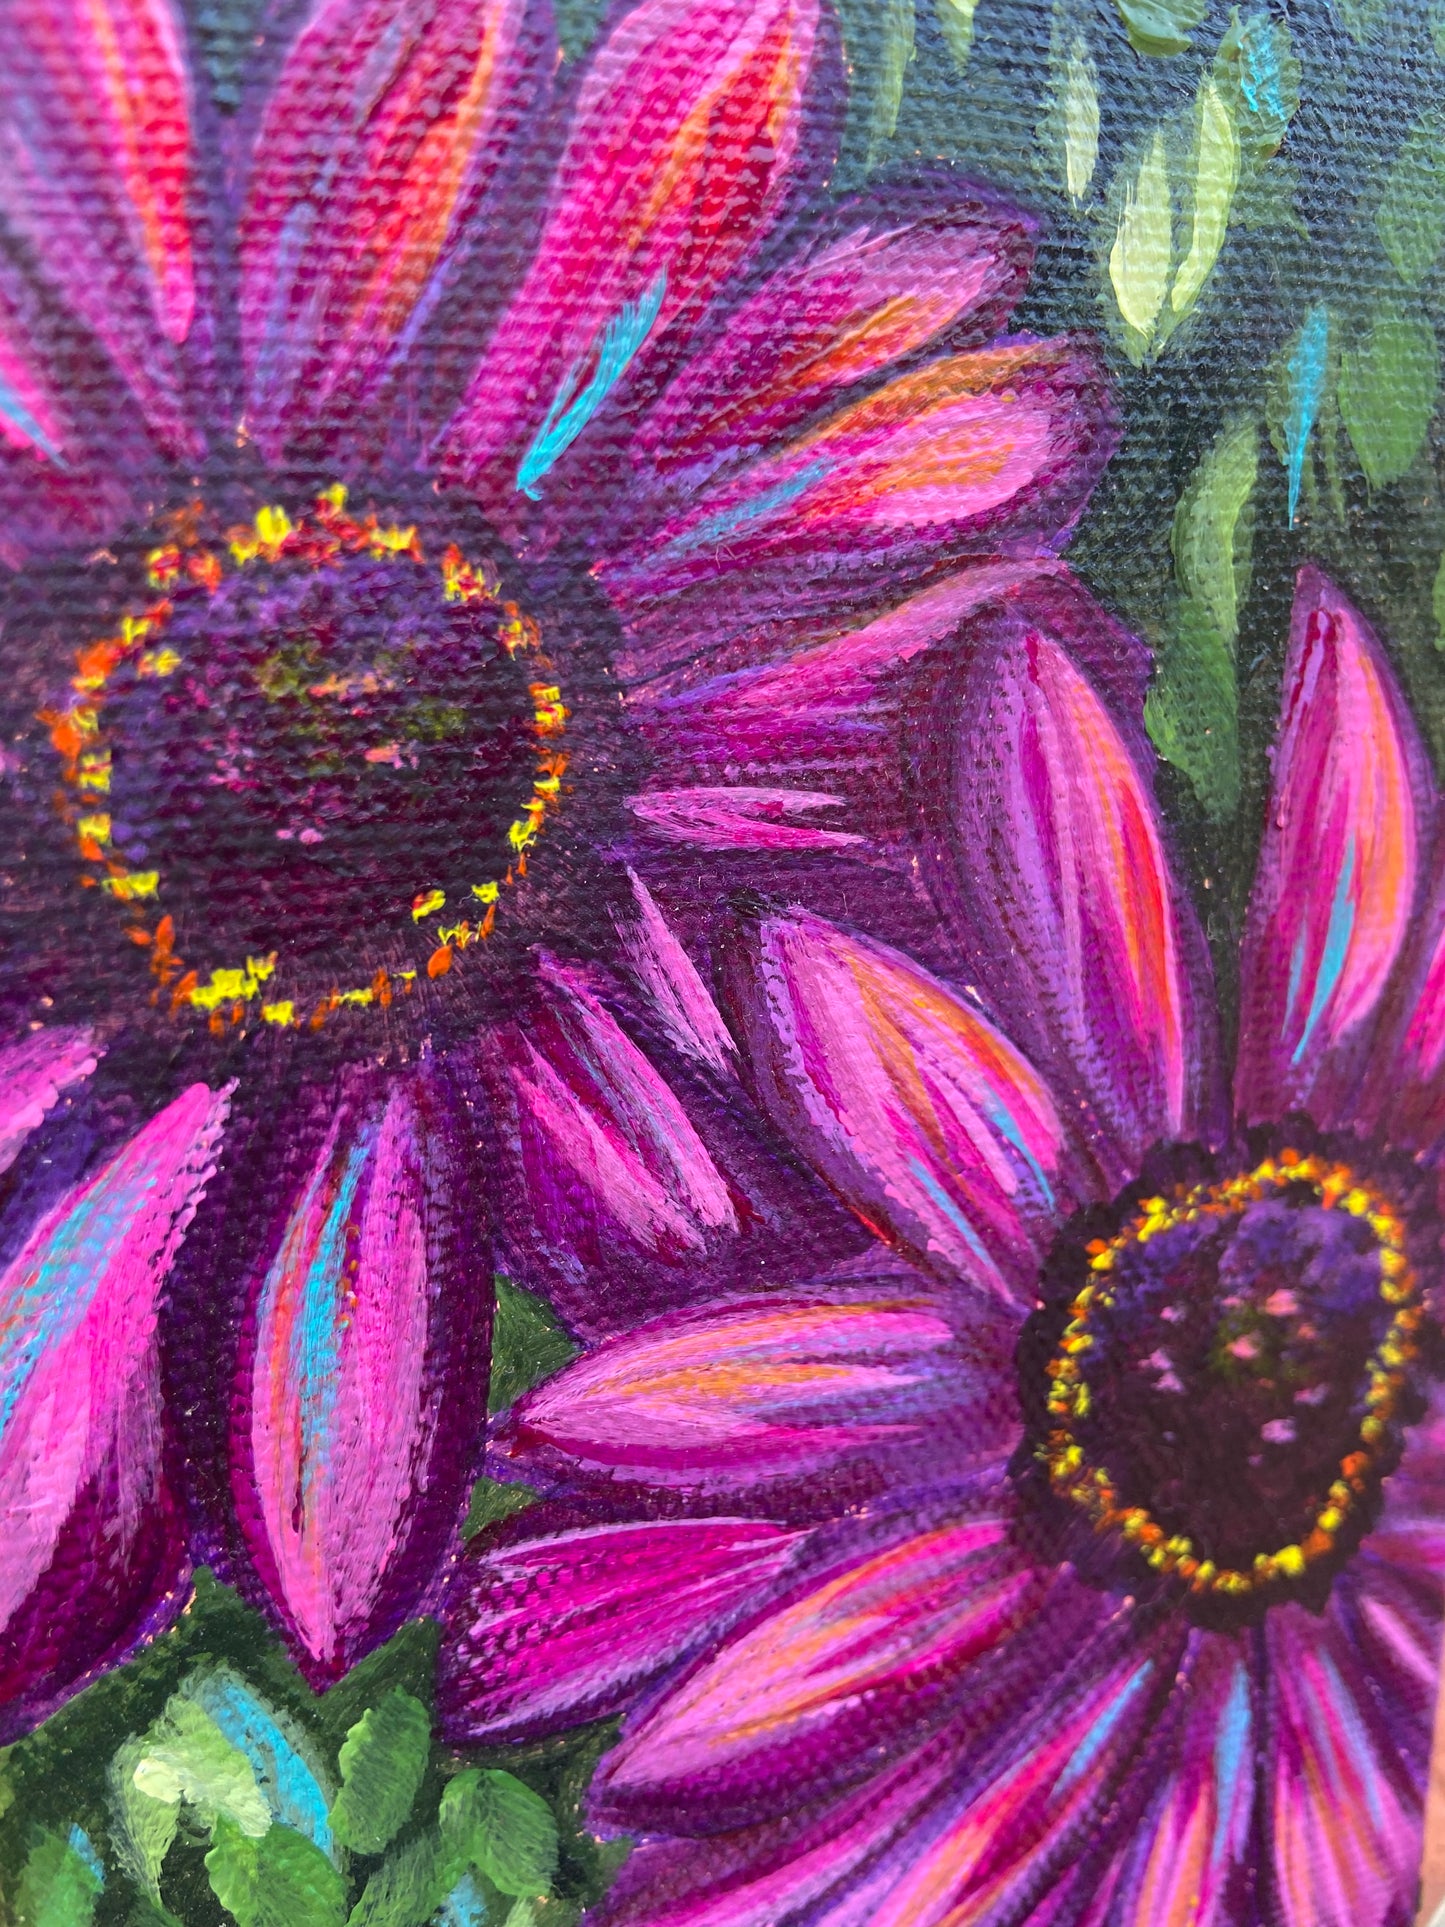 "African Daisies"